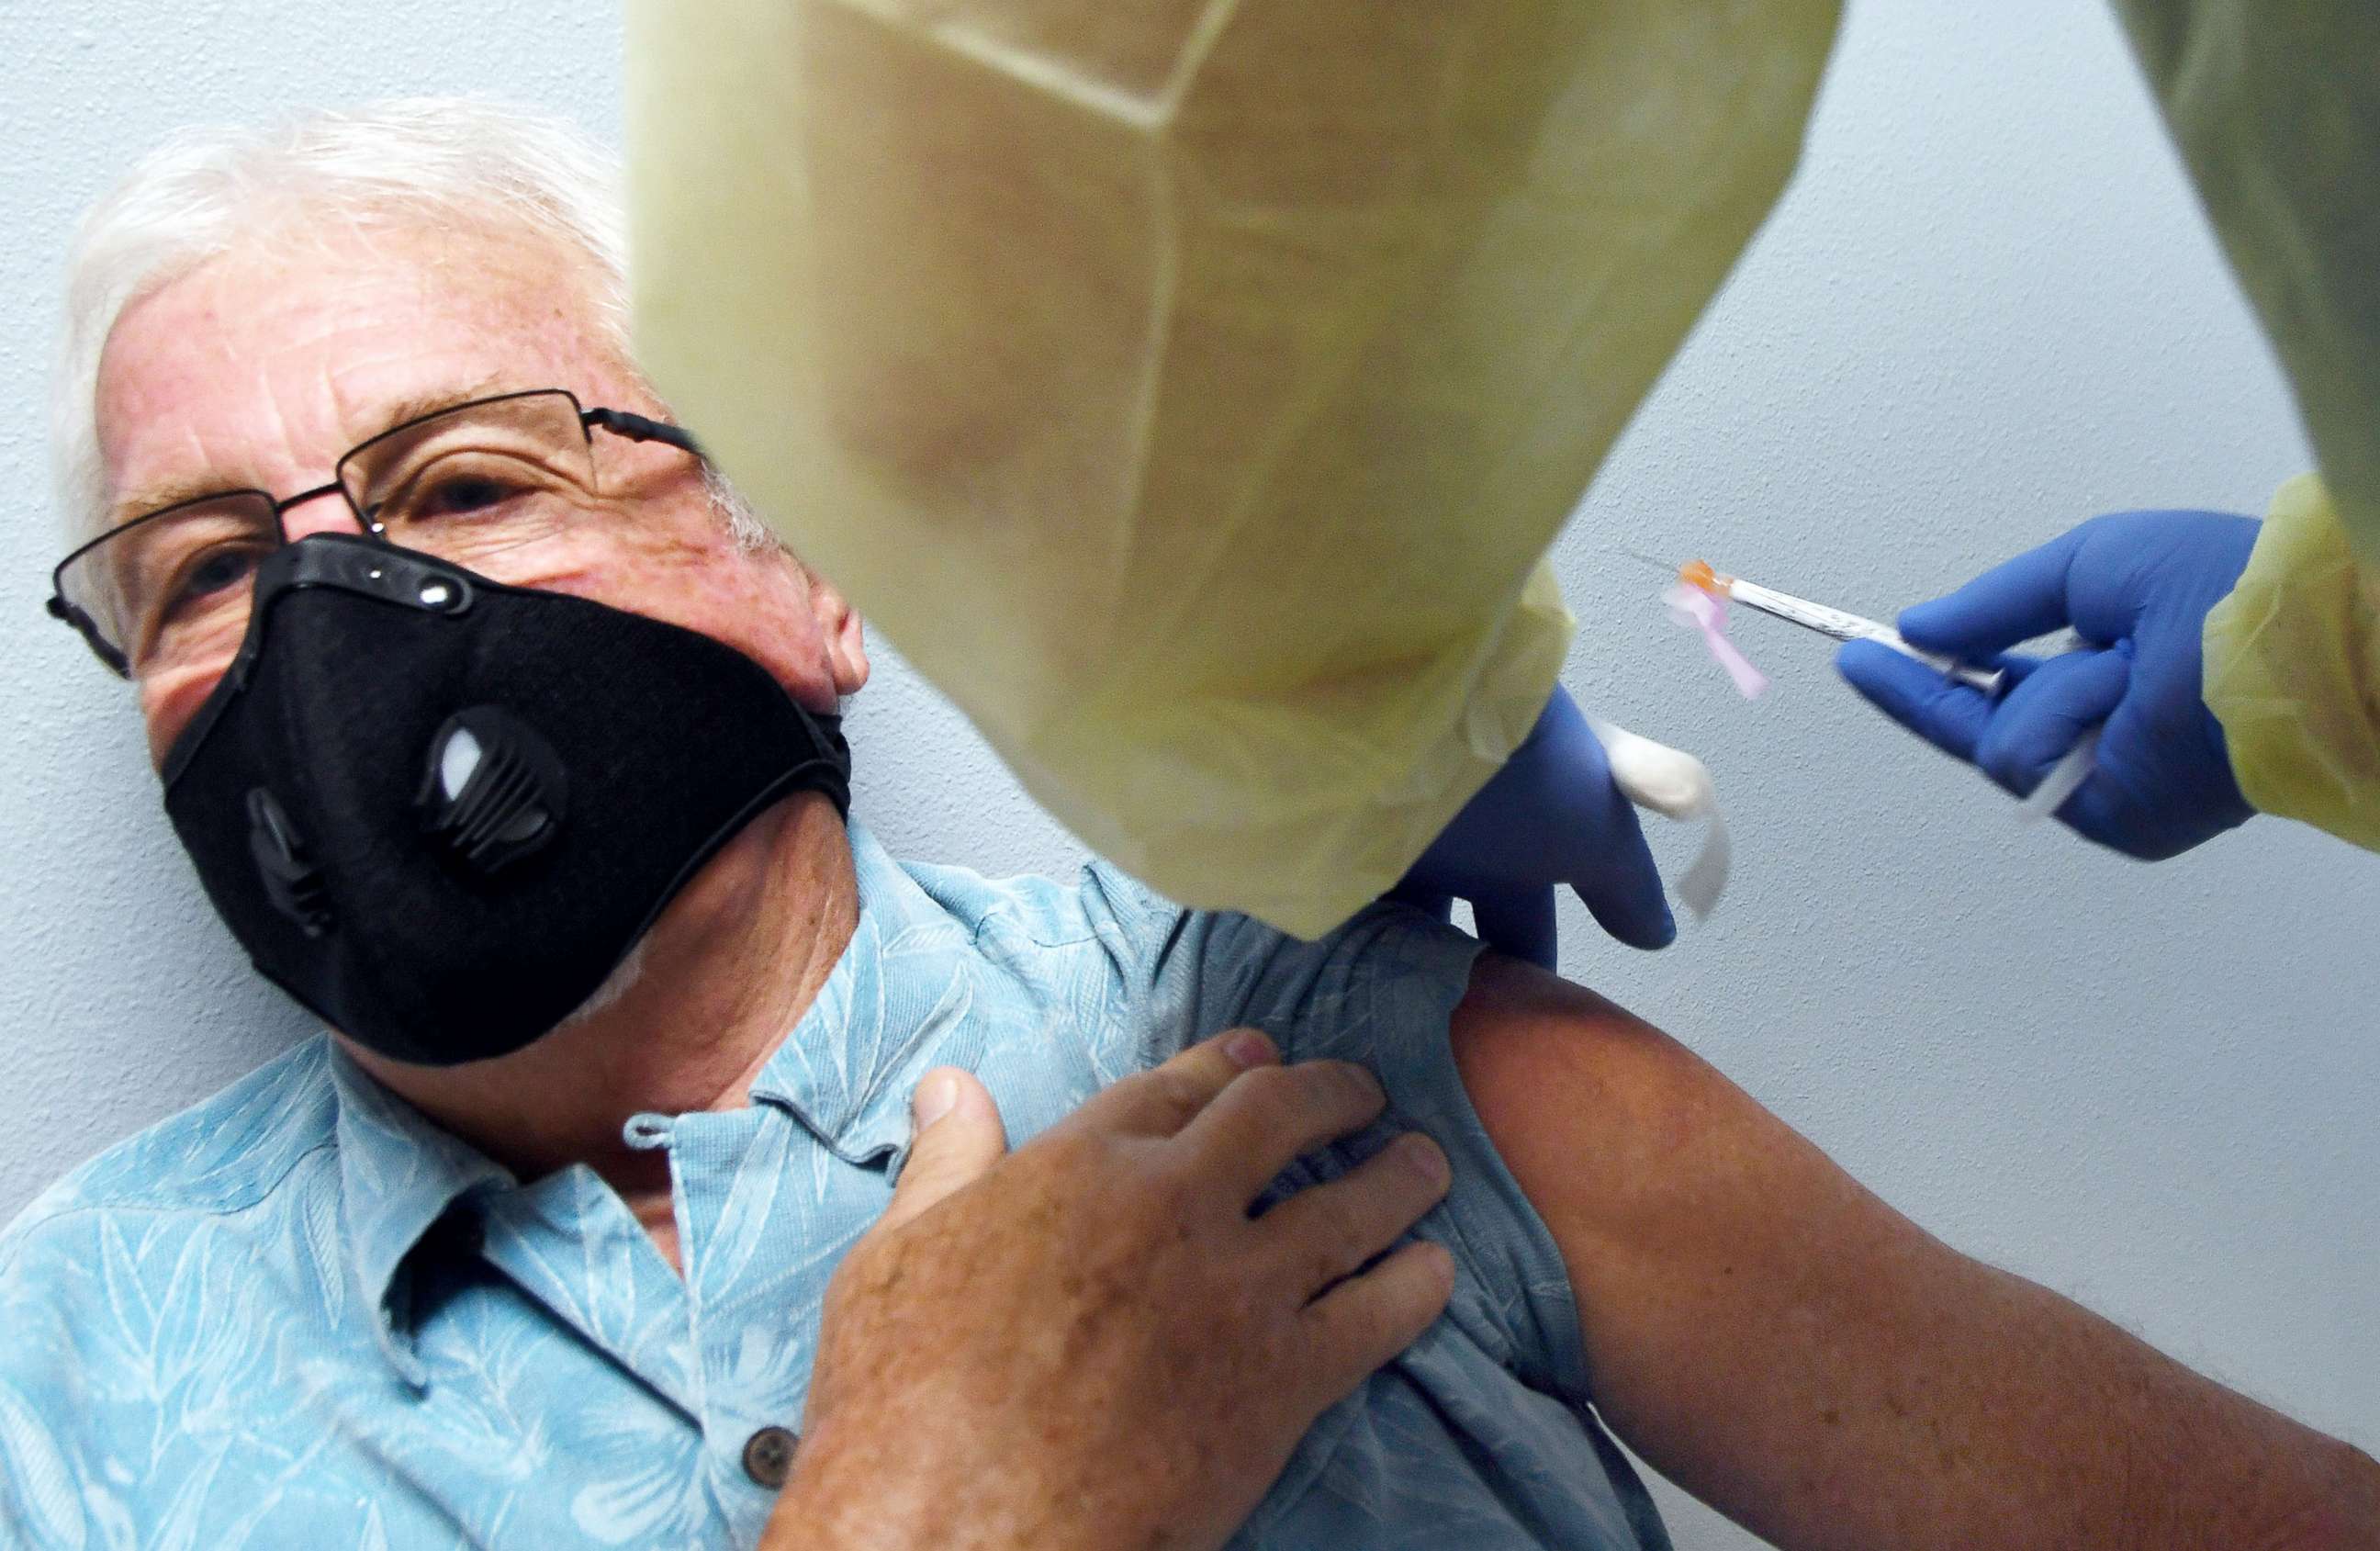 PHOTO: A dose of COVID-19 vaccine is administered during a clinical trial sponsored by Moderna at Accel Research Sites in DeLand, Fla., Aug. 4, 2020.